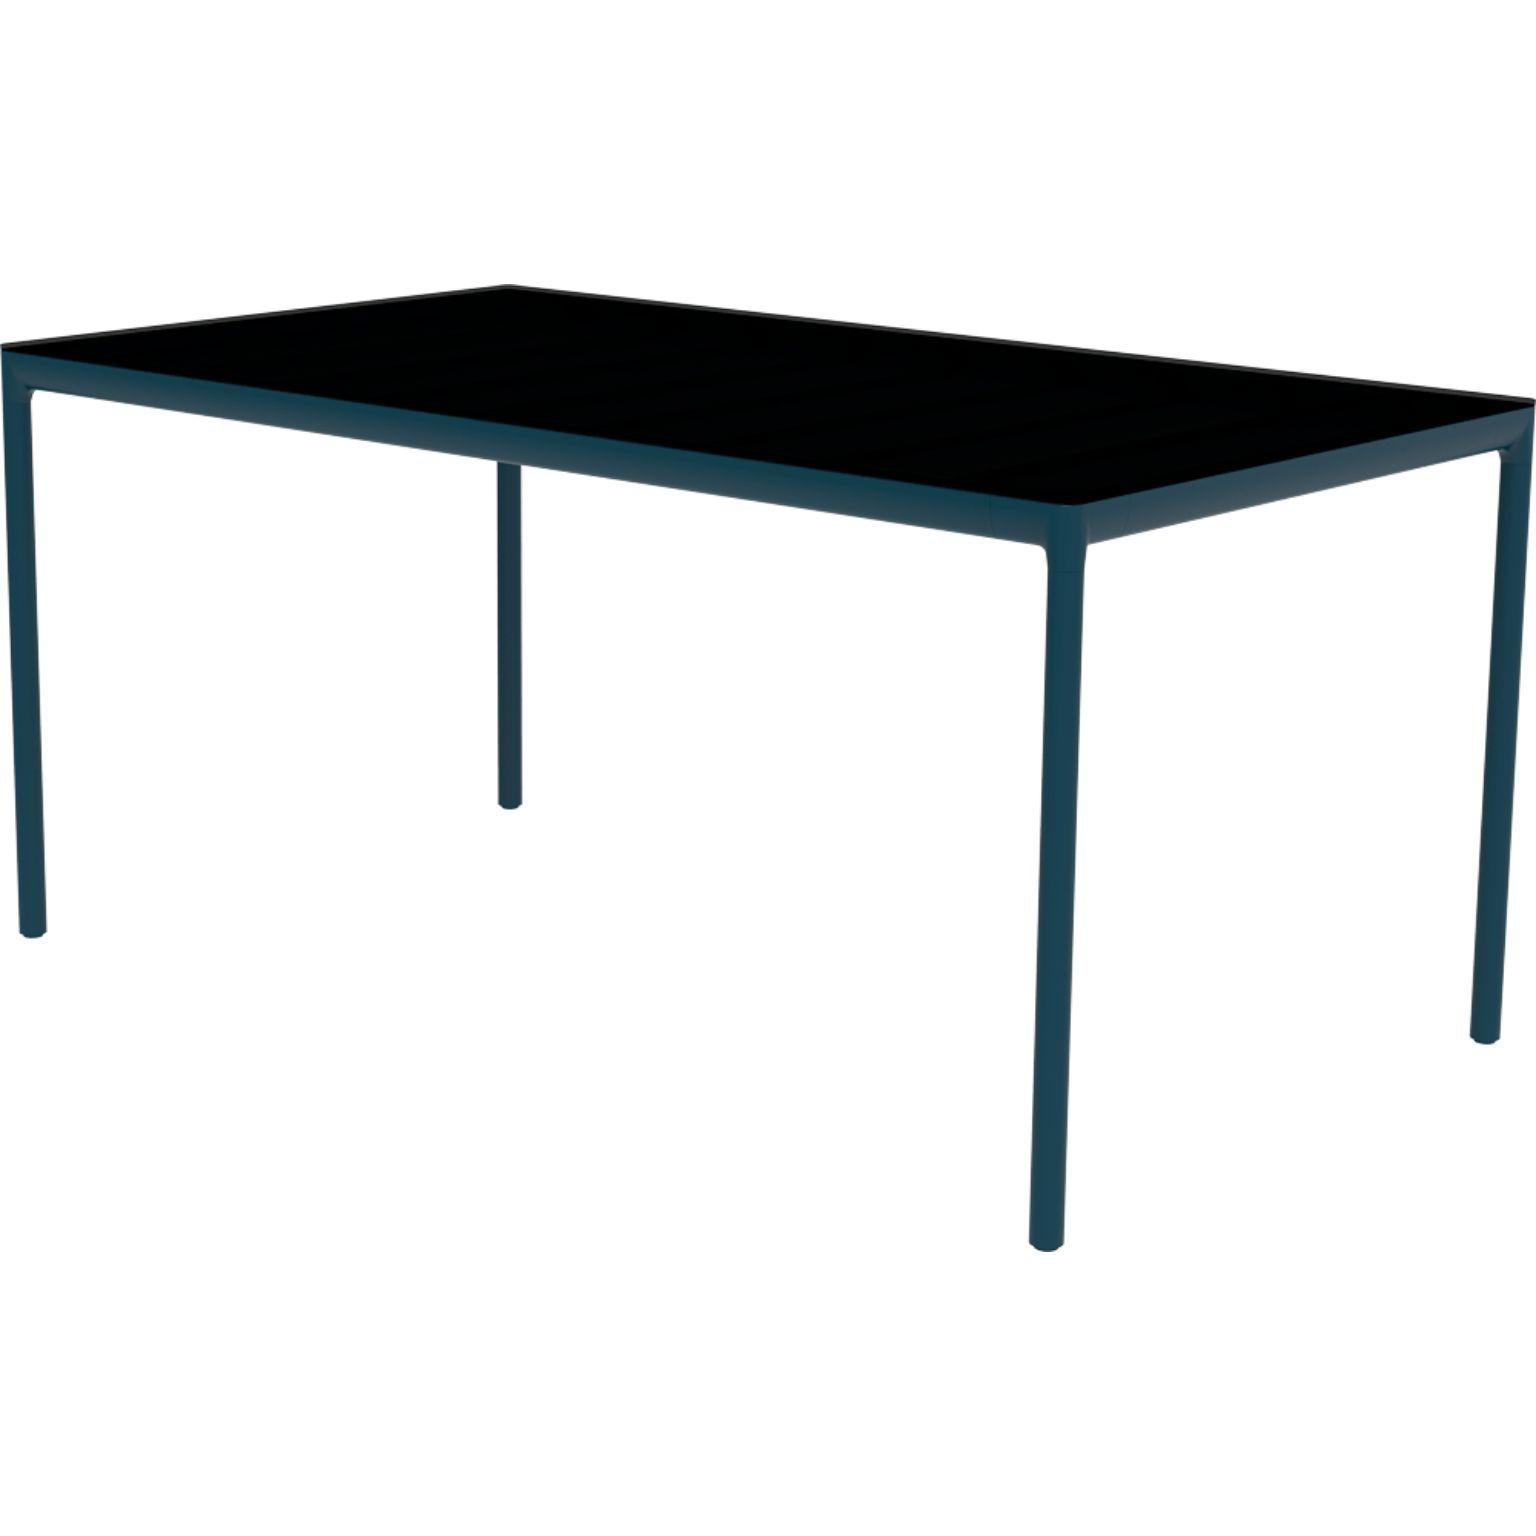 Ribbons Navy 160 coffee table by MOWEE
Dimensions: D90 x W160 x H75 cm
Material: Aluminum and HPL top.
Weight: 21 kg.
Also available in different colors and finishes. (HPL Black Edge or Neolith top).

An unmistakable collection for its beauty